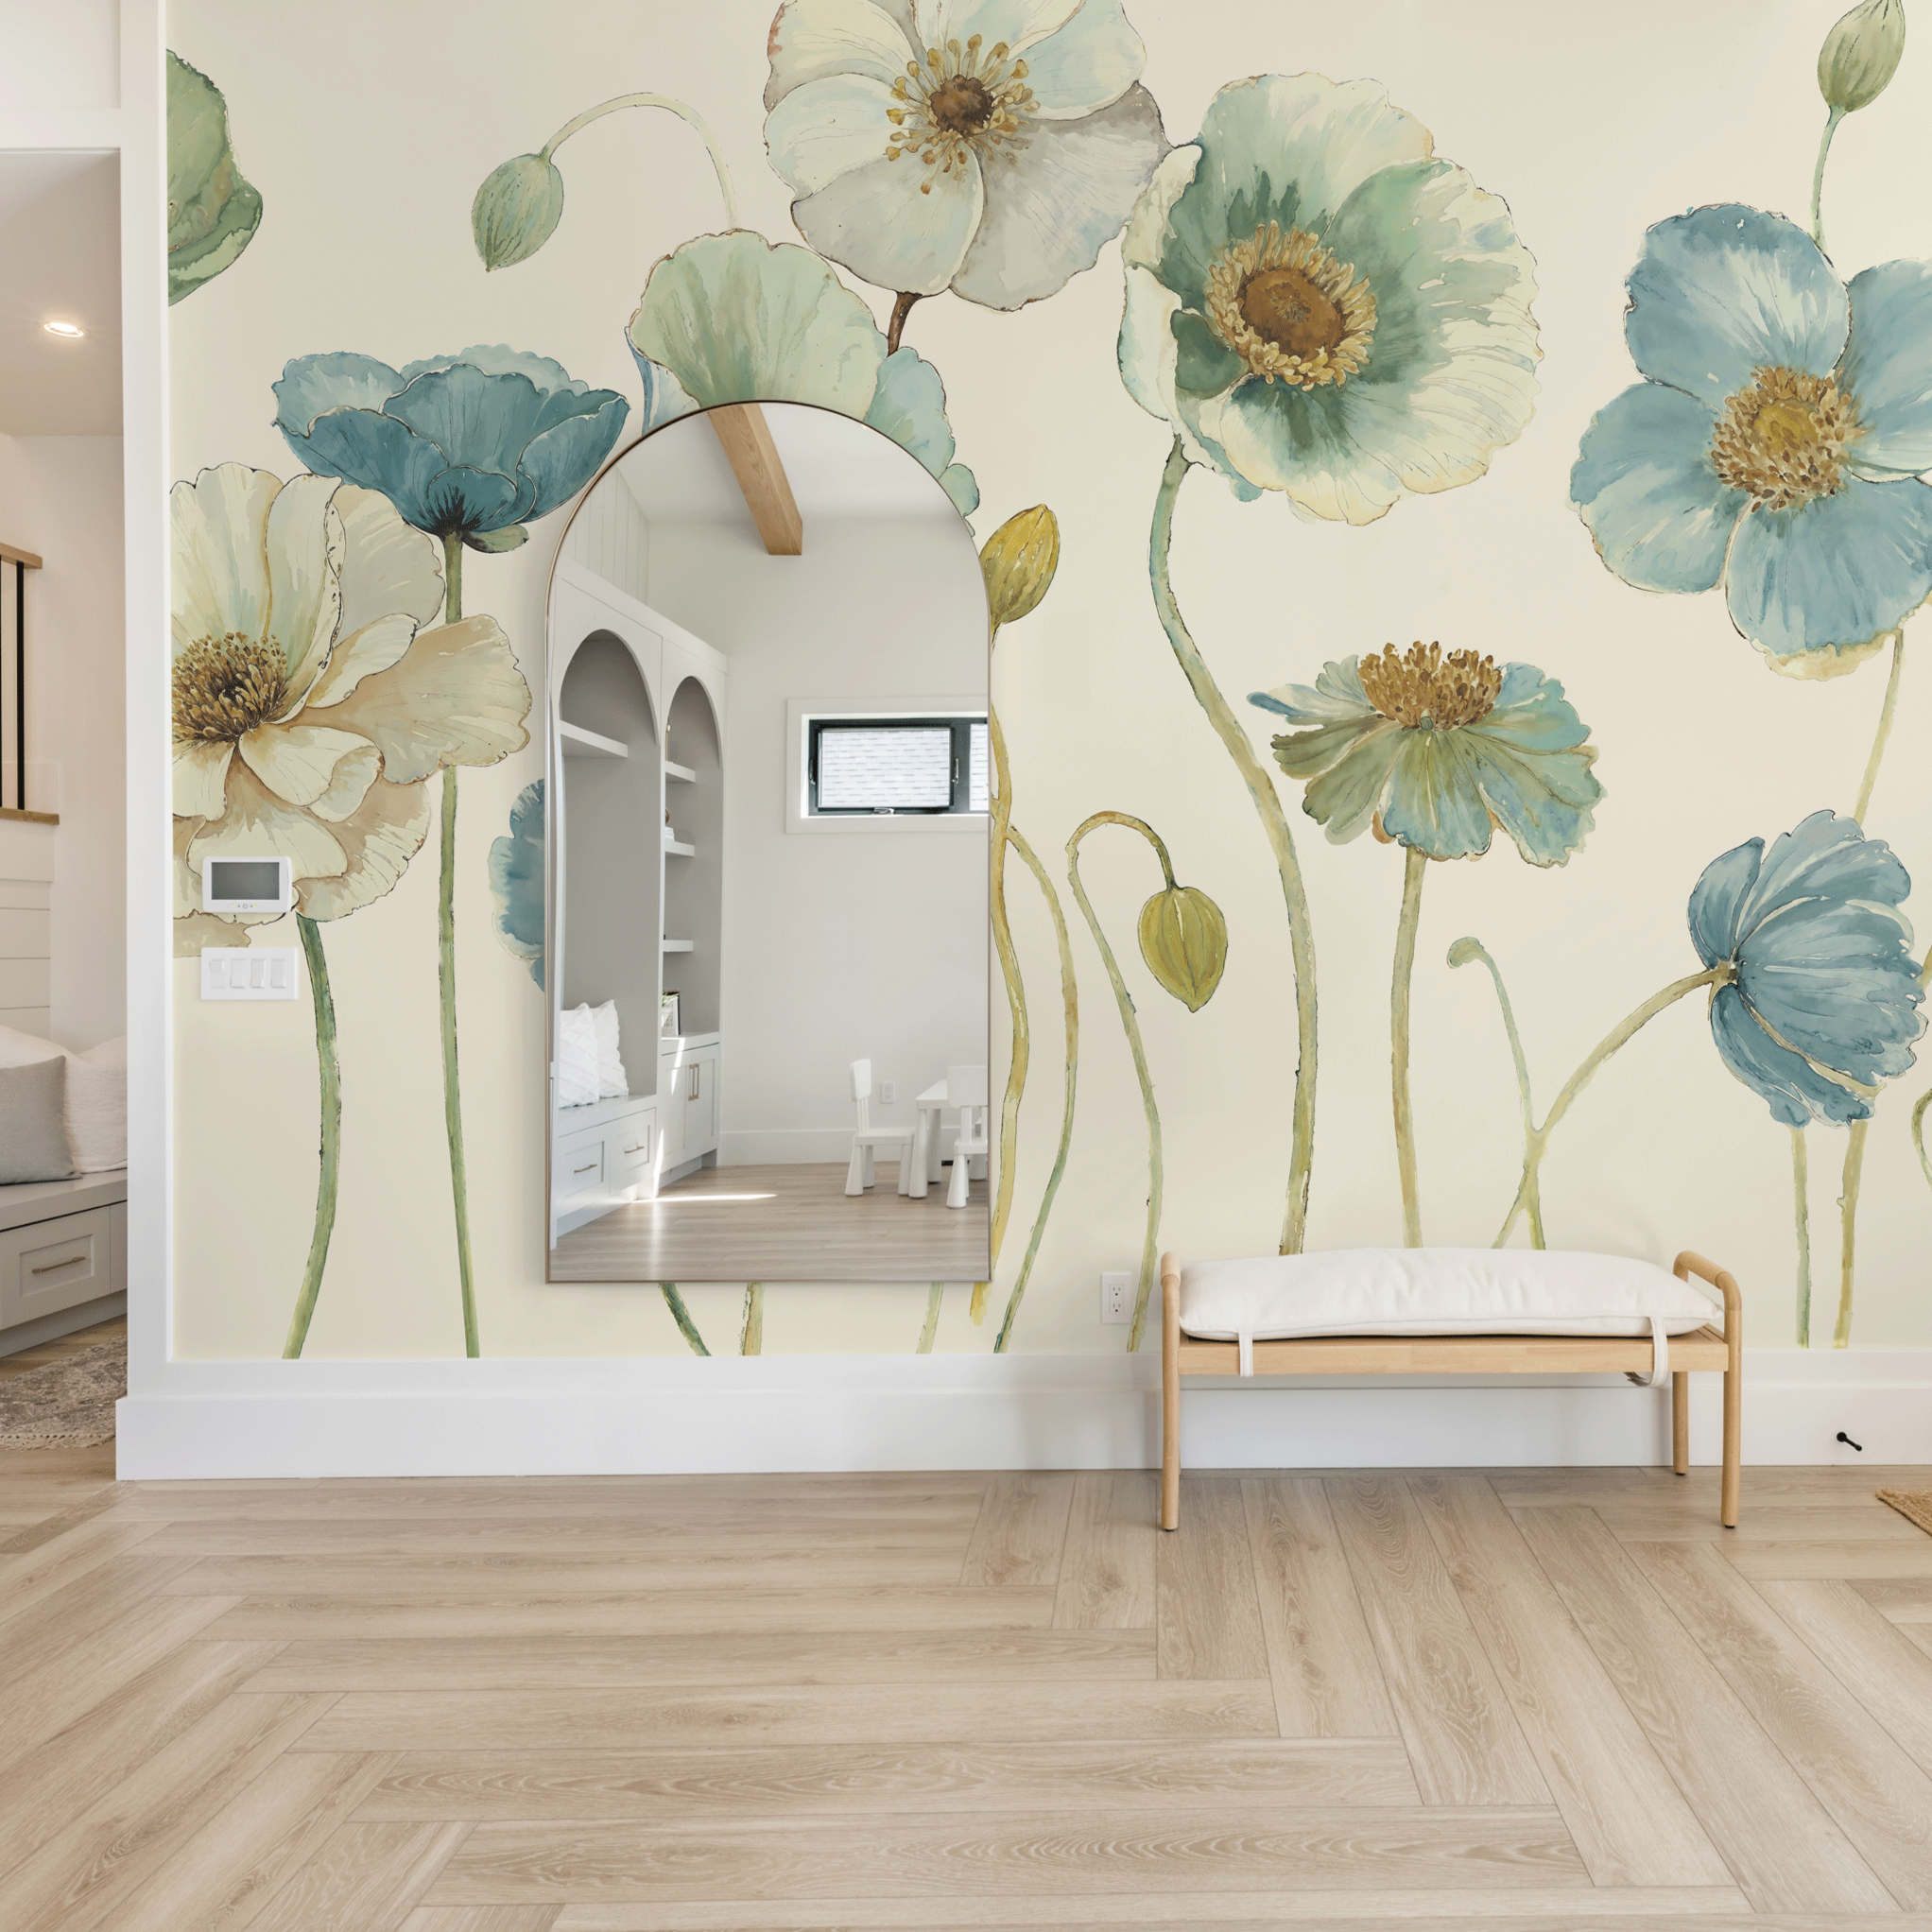 "Meadow Whispers (Cream) Wallpaper by Wall Blush in a modern living room, with focus on floral wall decor."